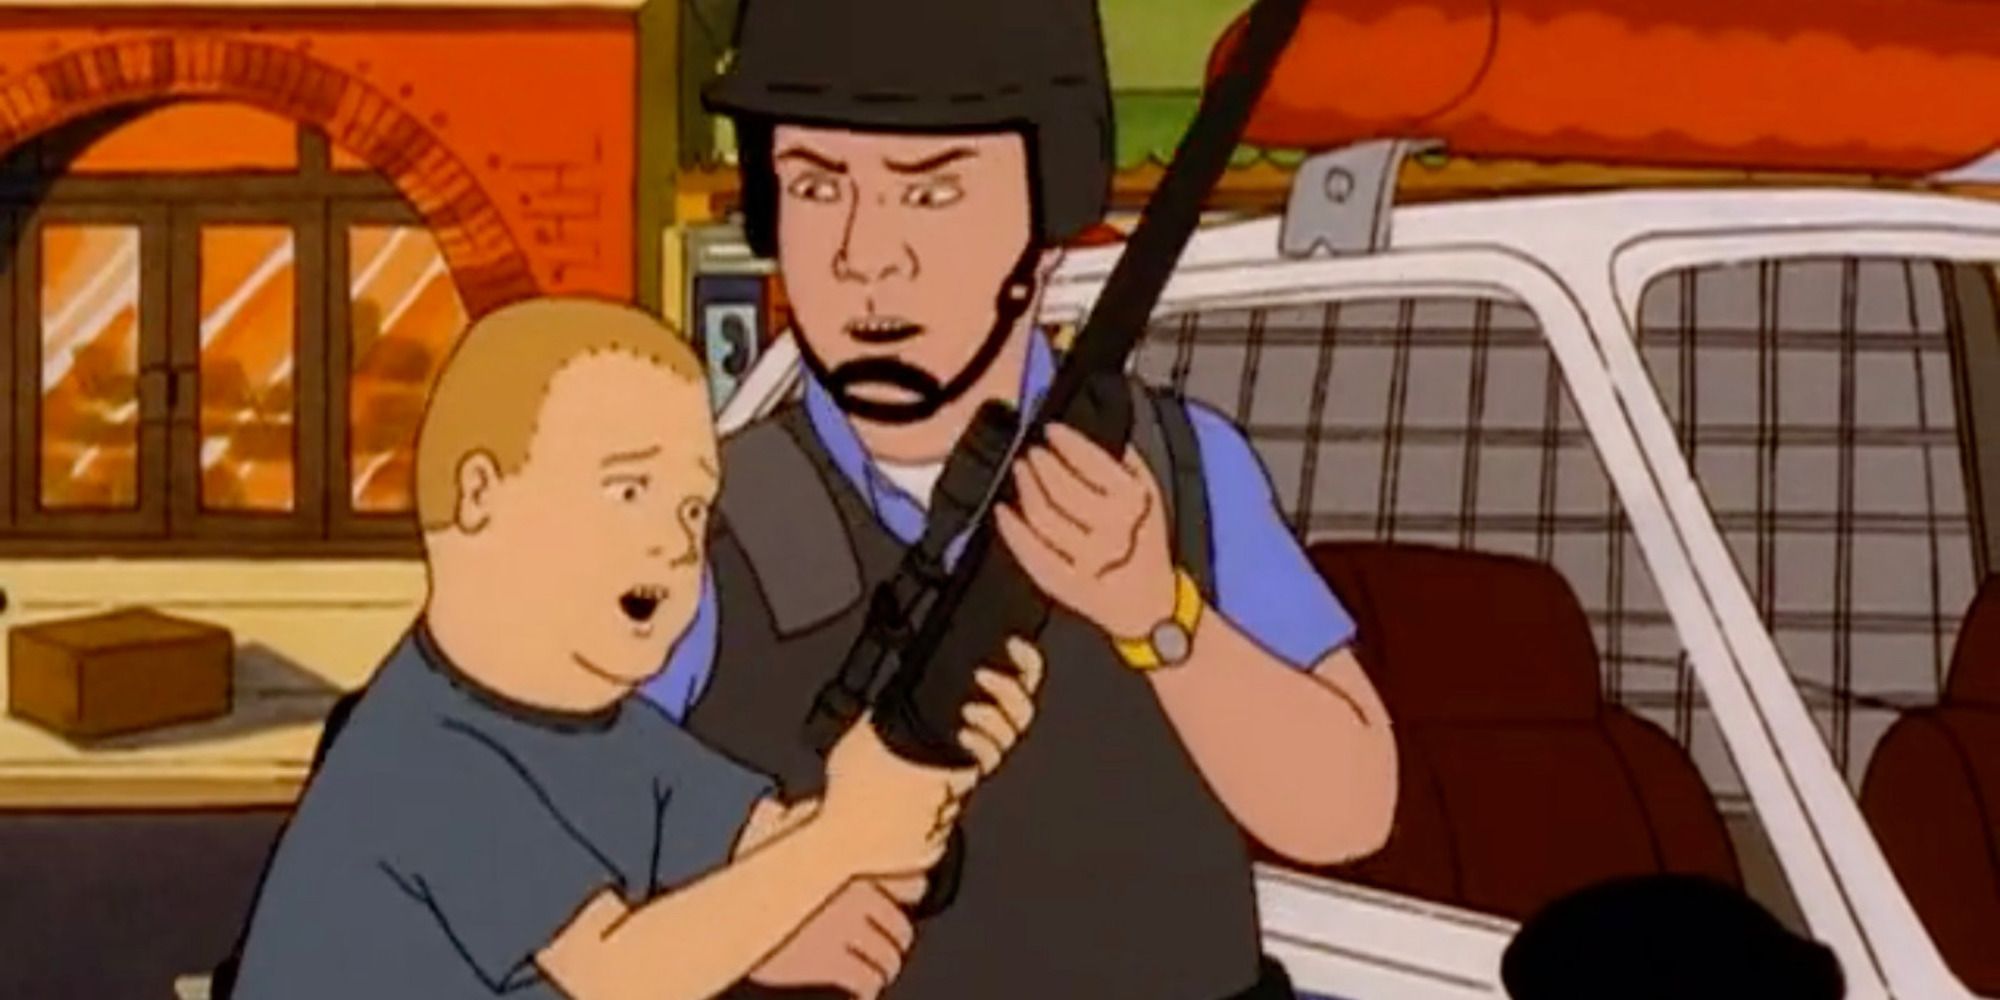 Bobby and a cop from King of the Hill